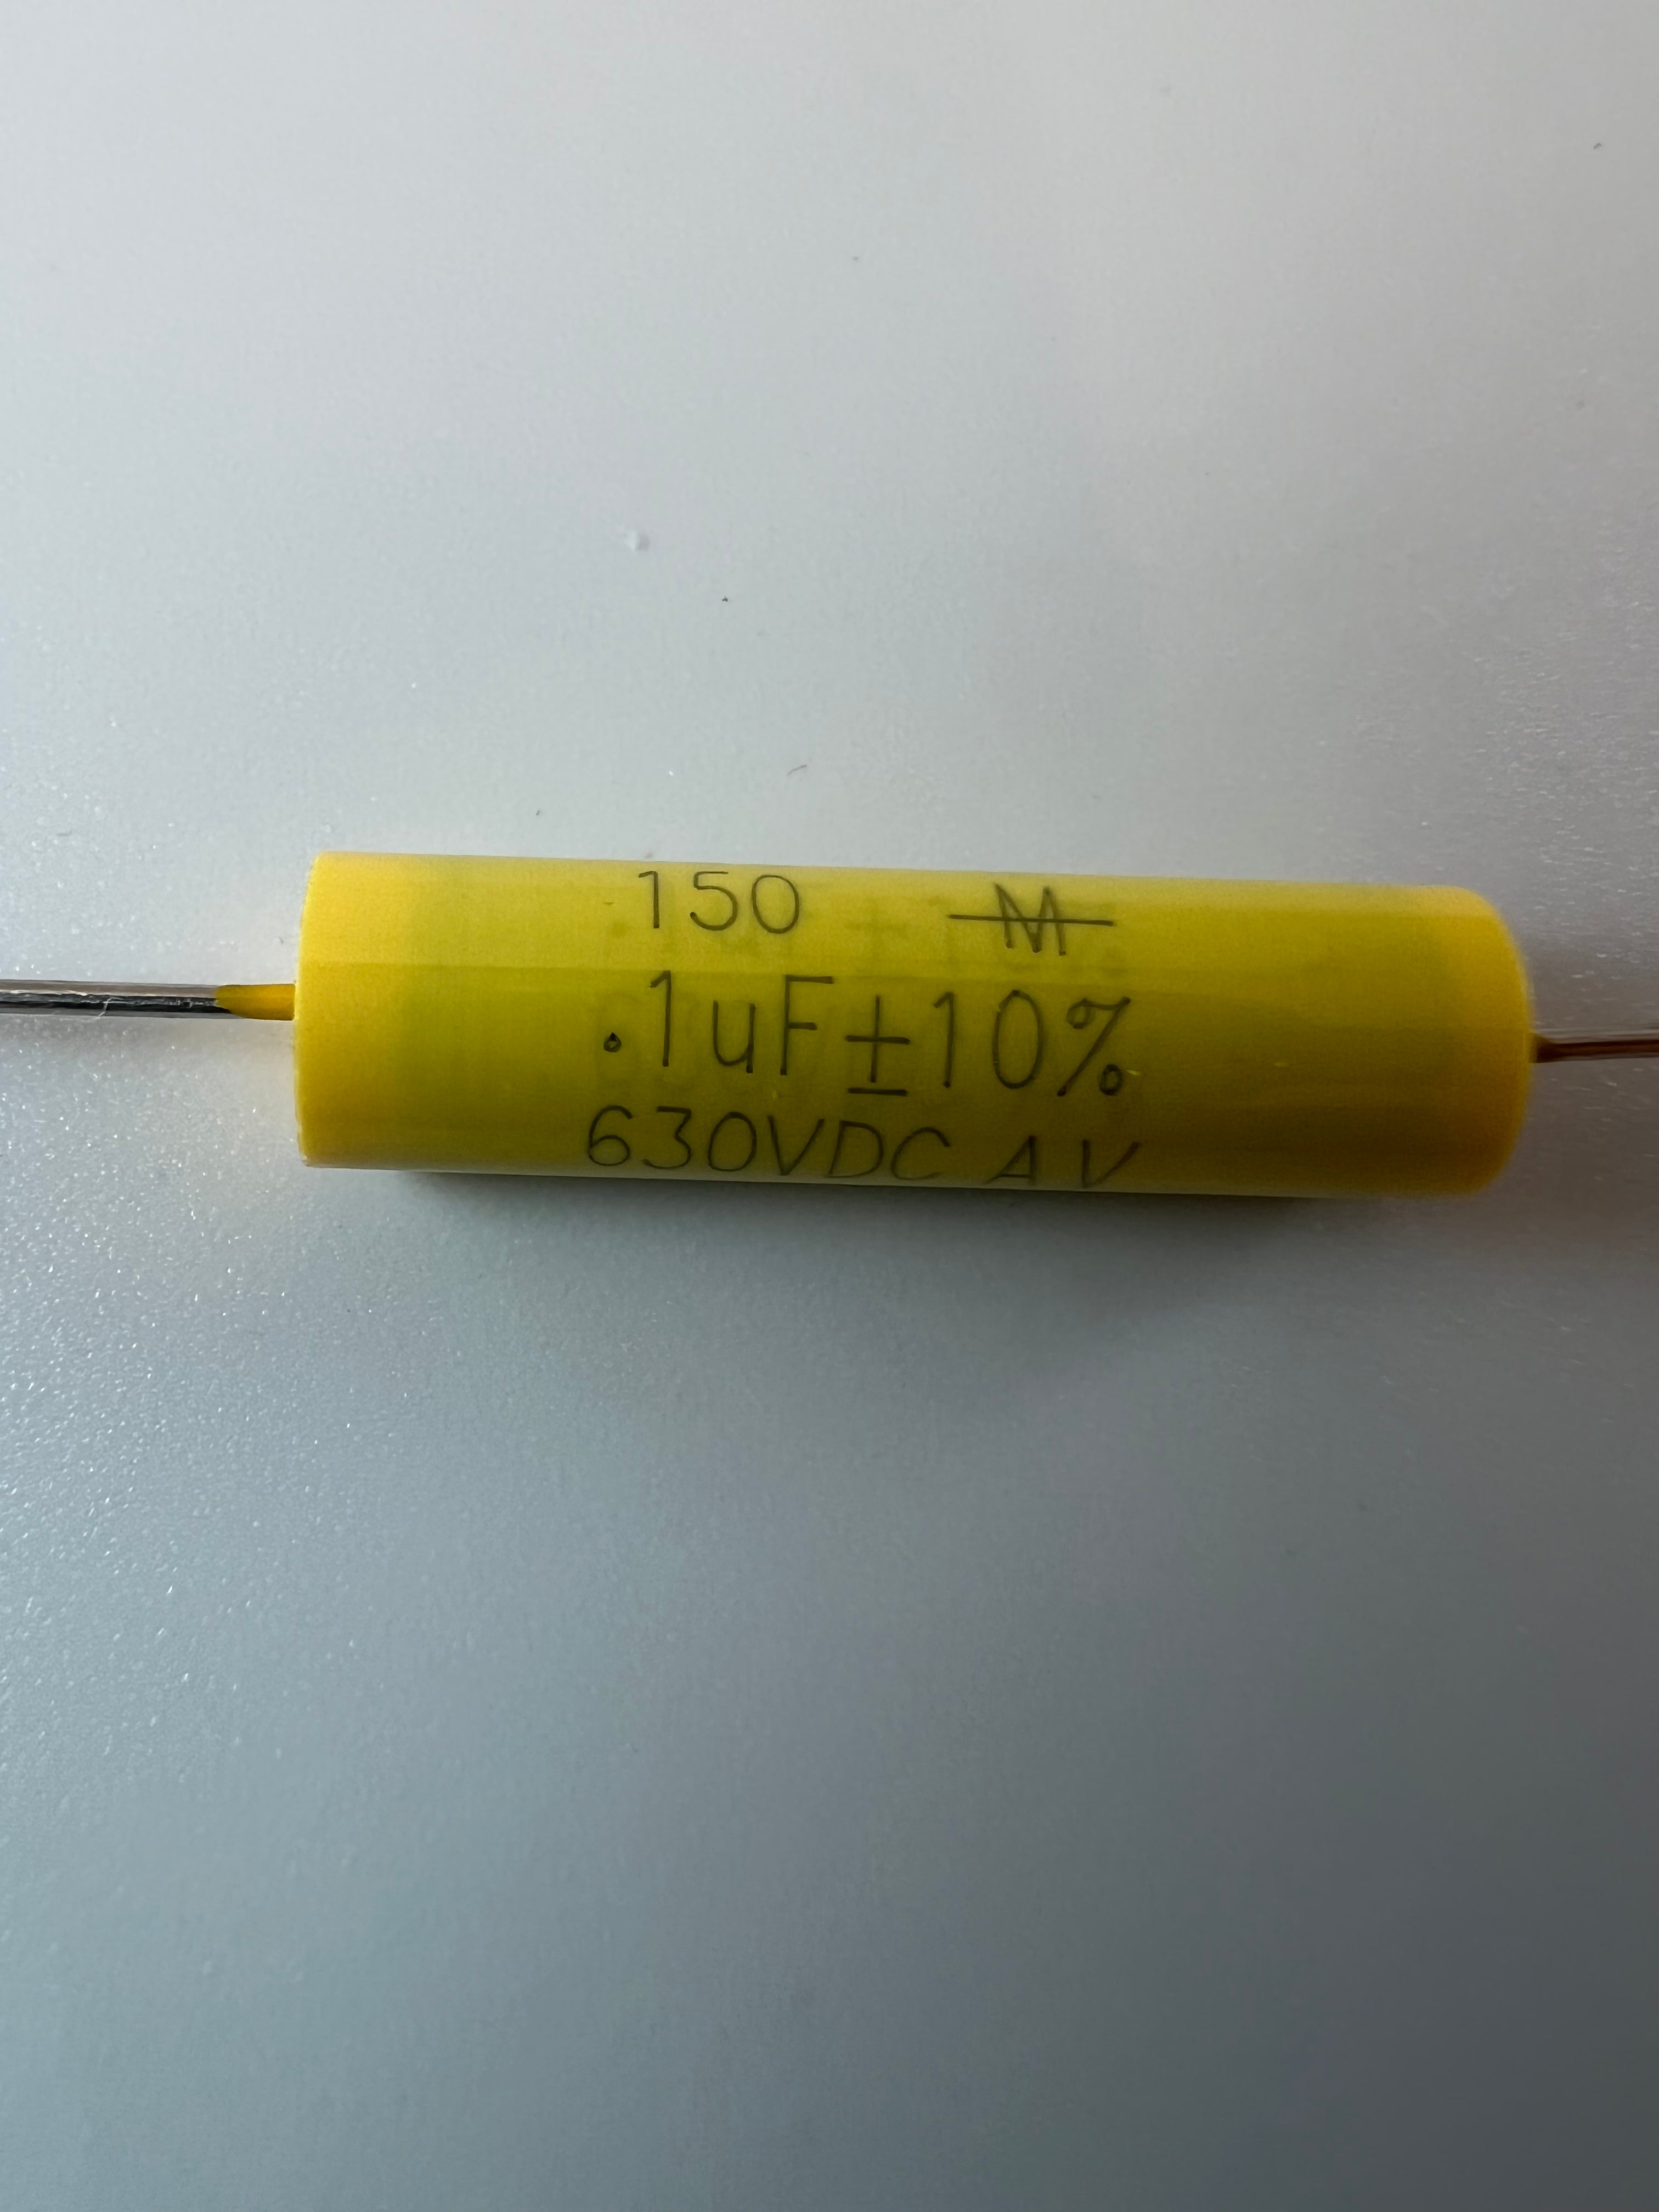 Capacitor - Axial Lead Electrolytic